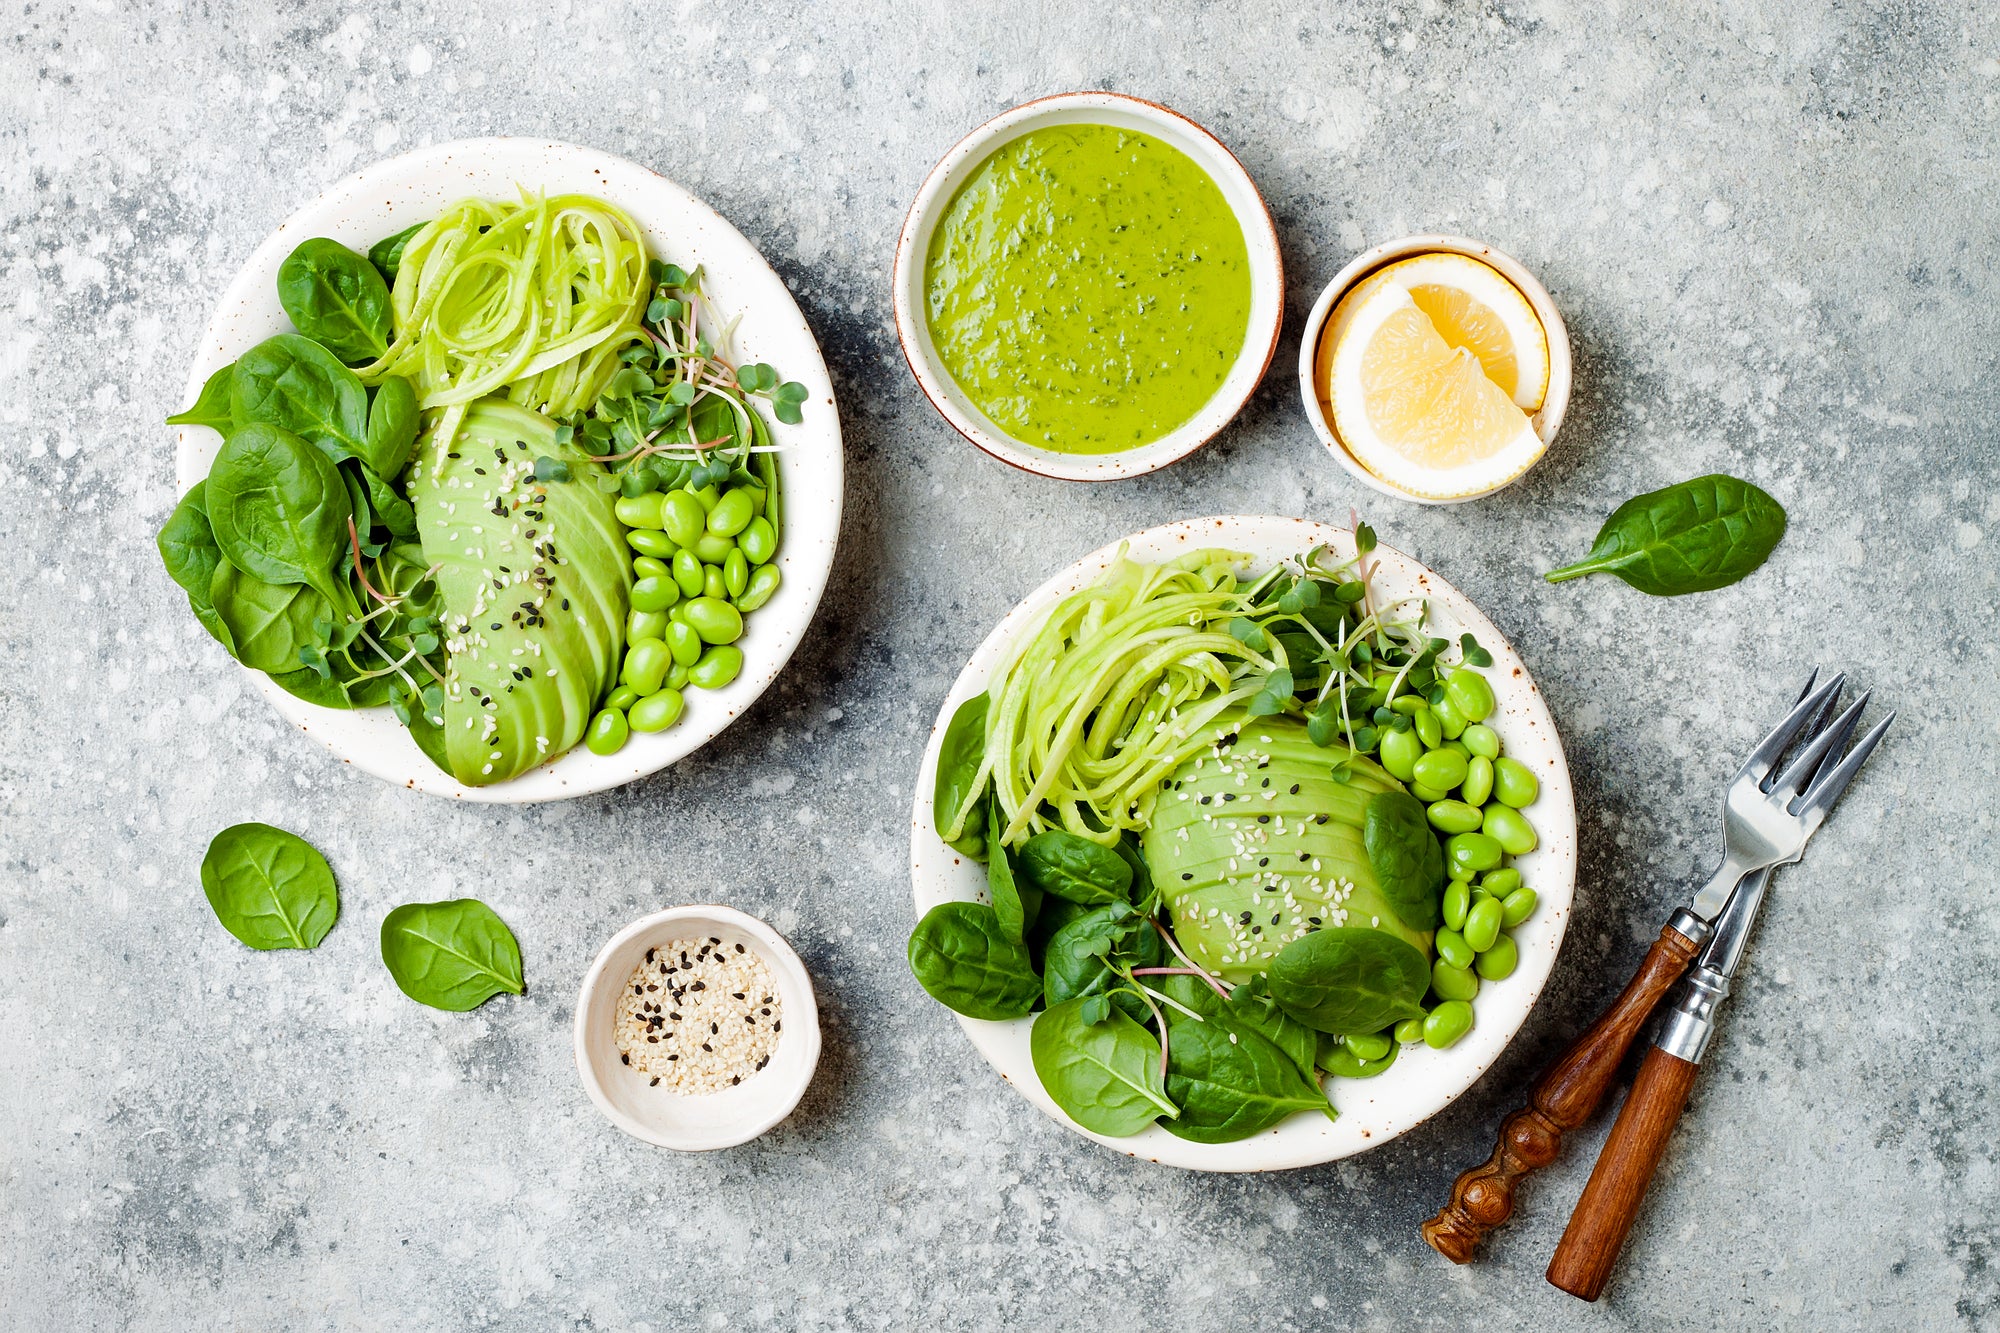 top view of two plates of fresh pressed greens salad dressing surrounded by two forks, a small bowl of slices of lemon, a bowl of pressed green salad dressing, and a small bowl of black and white sesame seeds on top of a concrete table